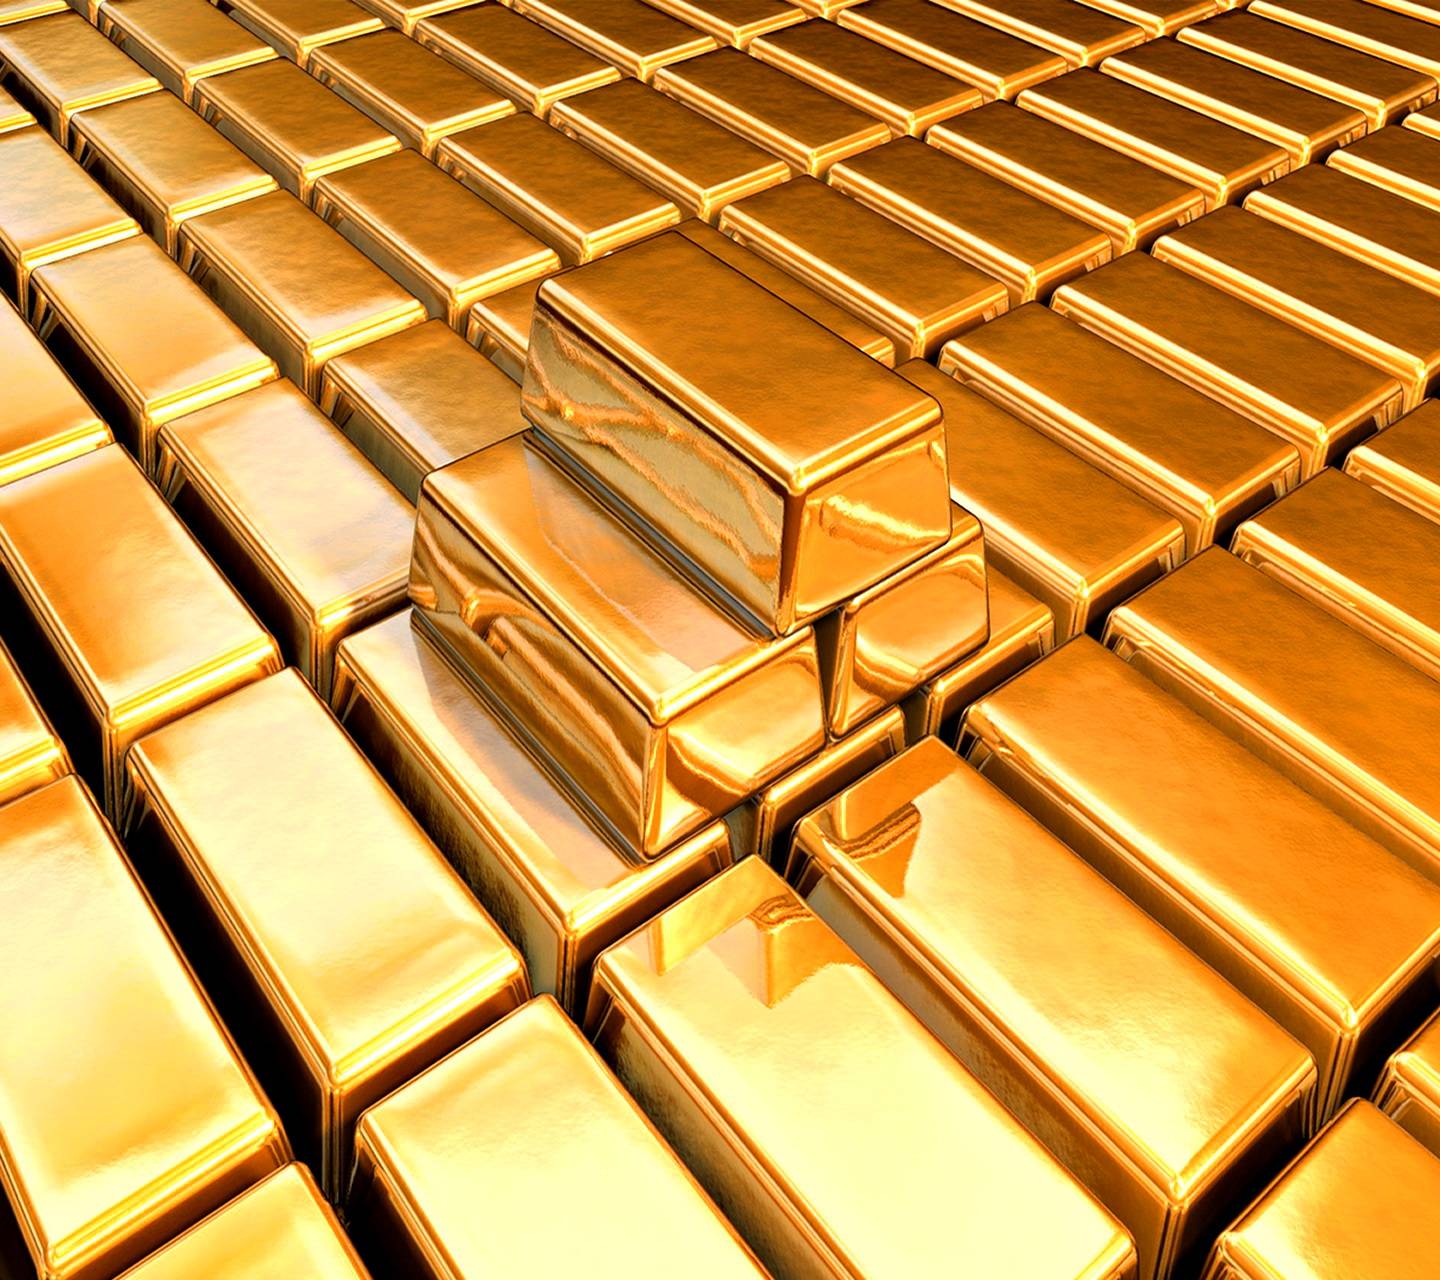 Why Are Heavier Gold Bars Cheaper Compared To Gold Jewelry?